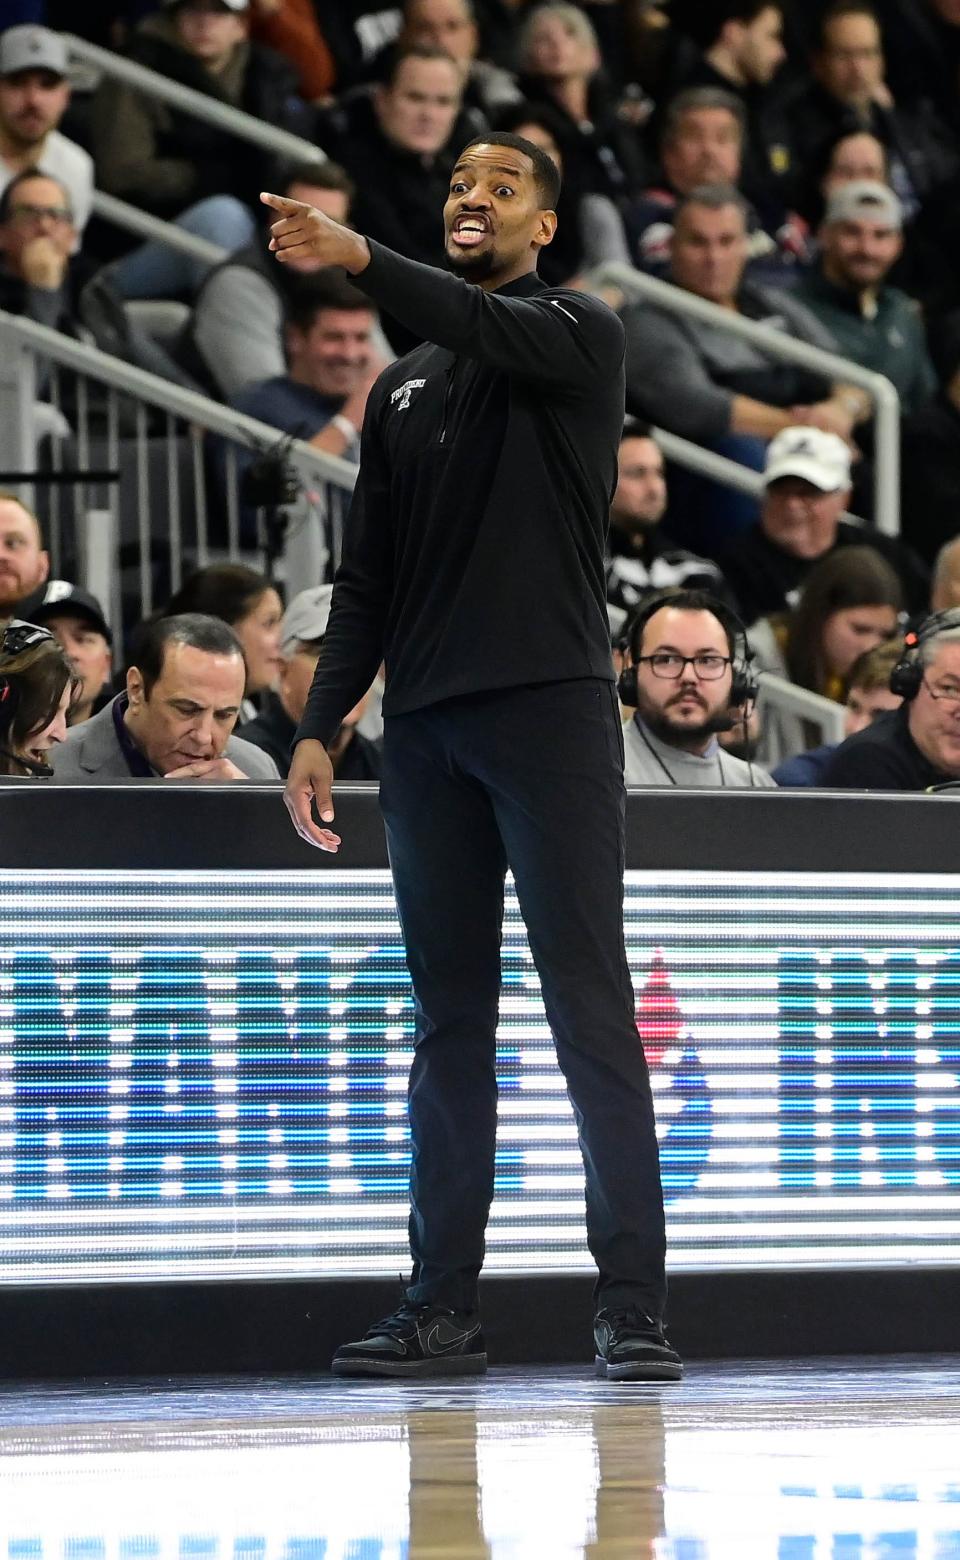 Friars head coach Kim English reacts to game action during the first half Tuesday night at Amica Mutual Pavilion.